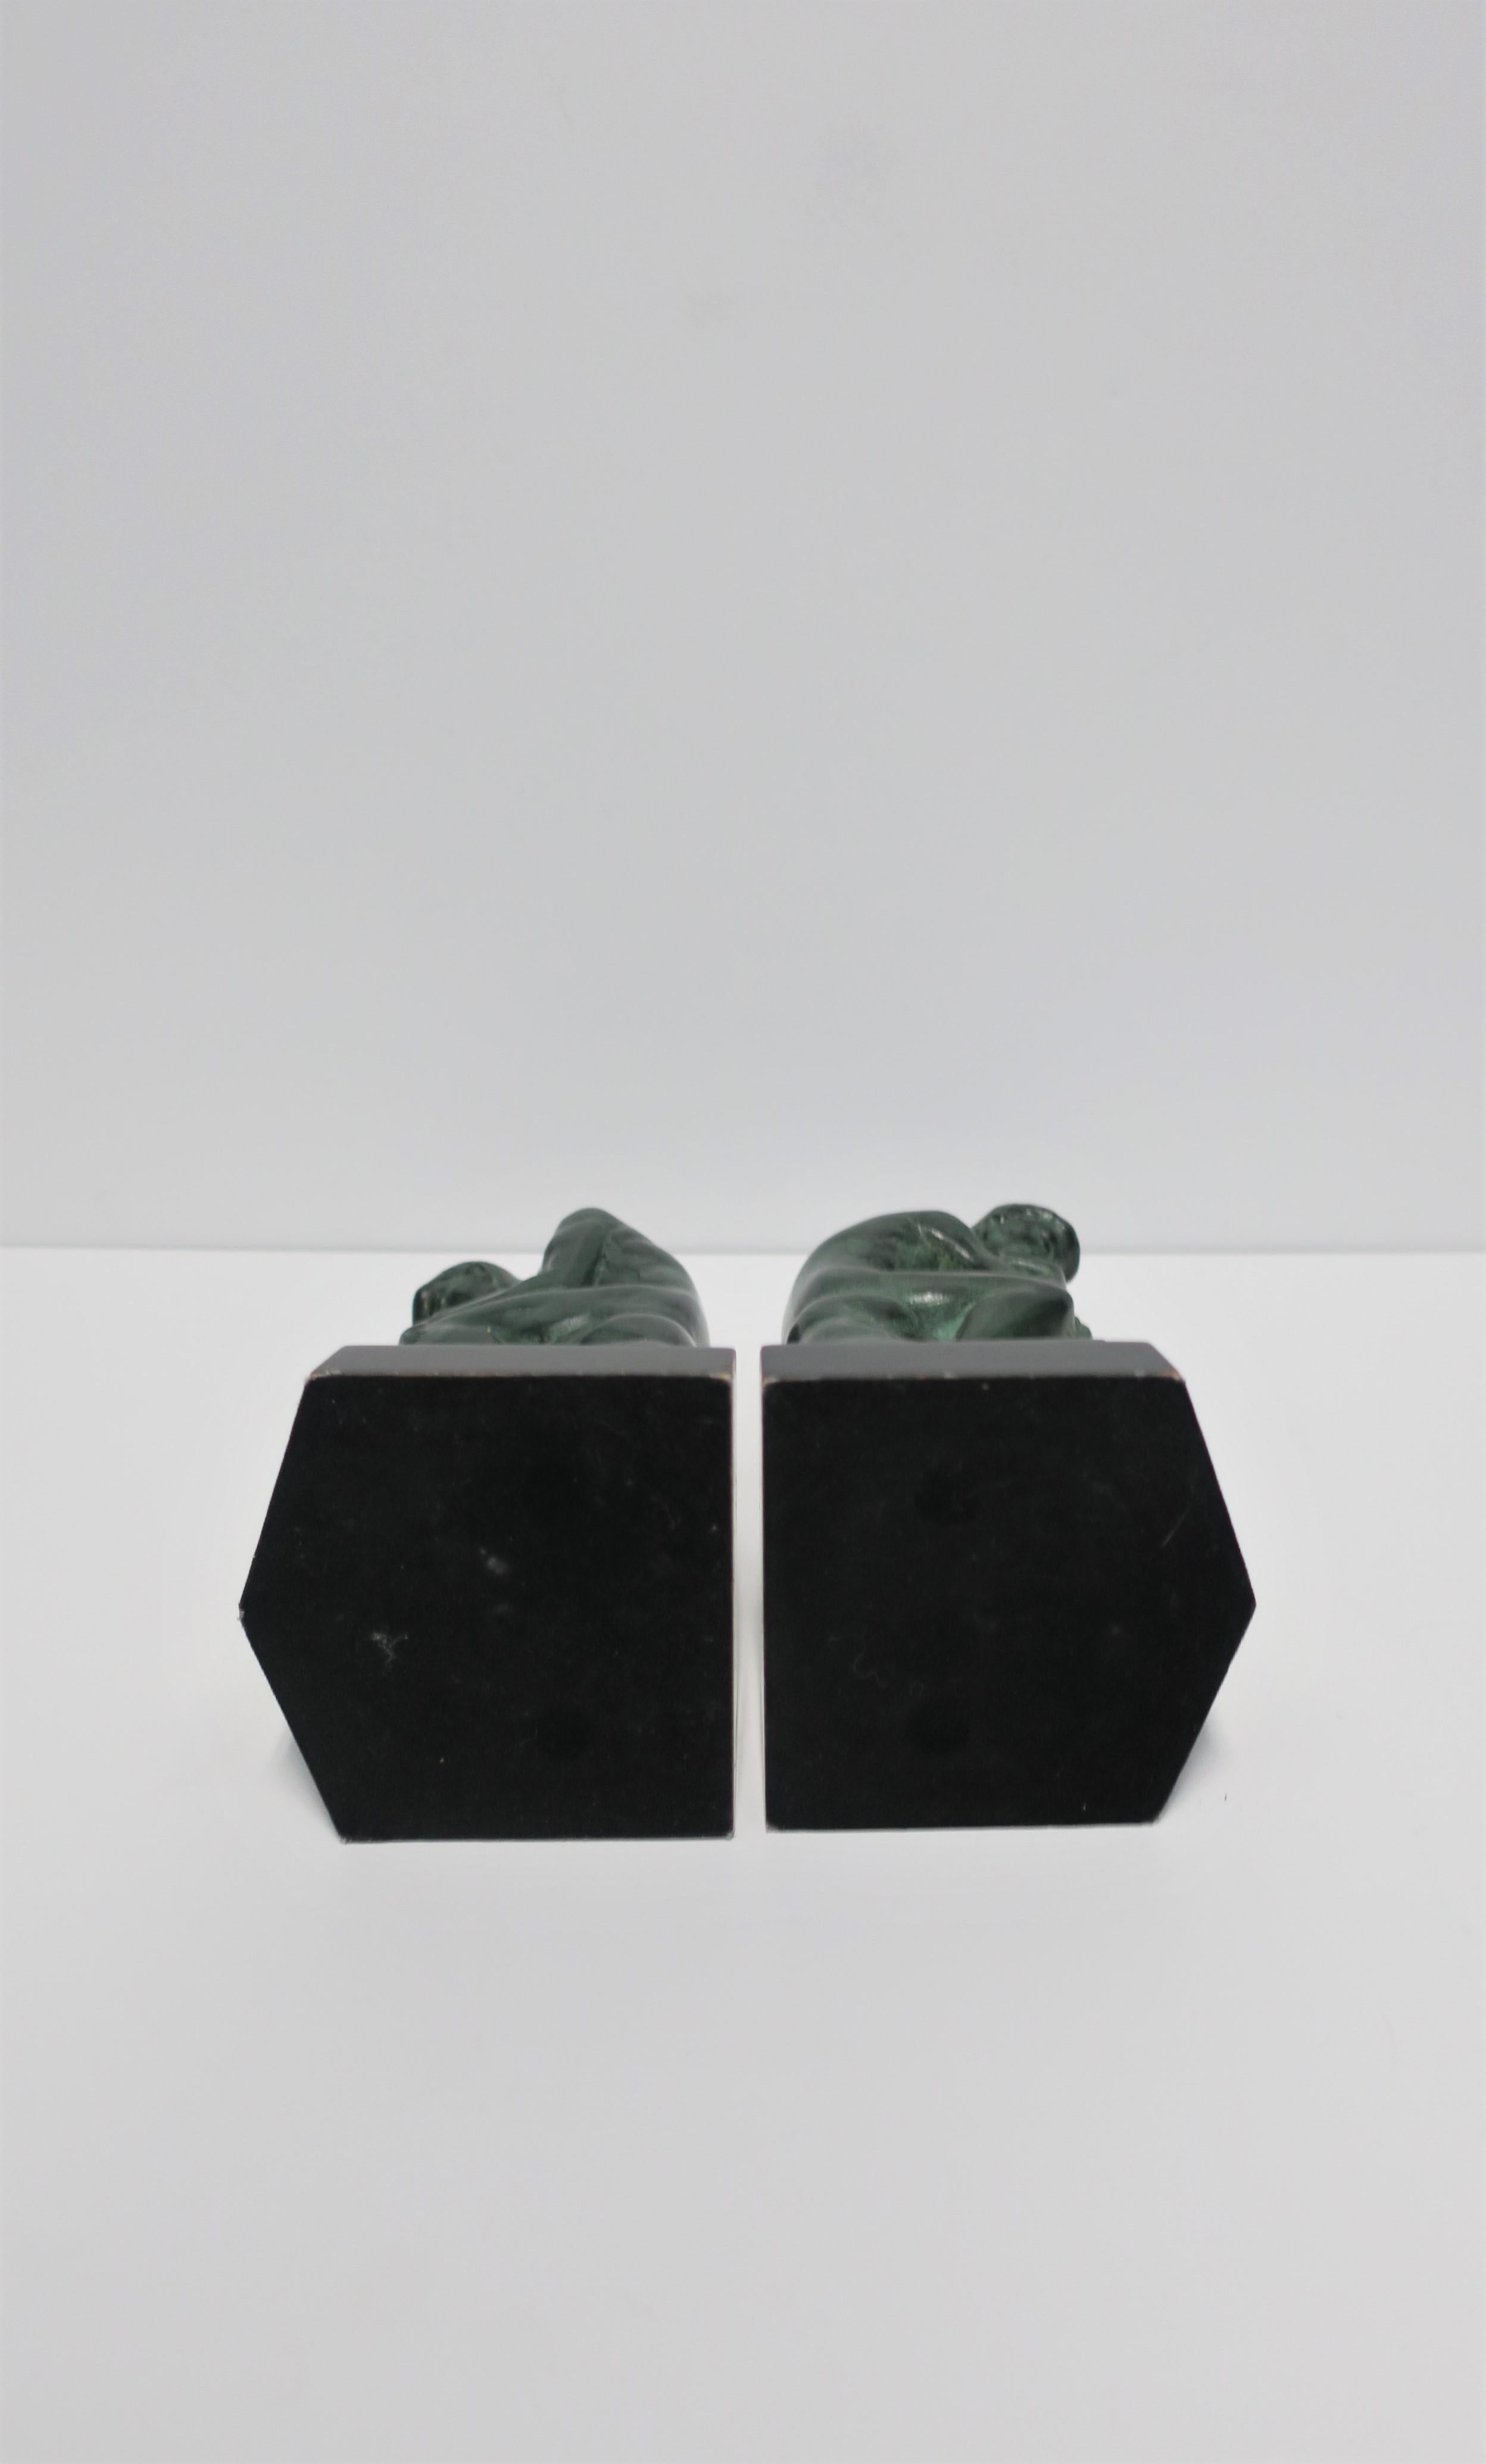 Black and Green Male Sculpture Bookends, Pair 5